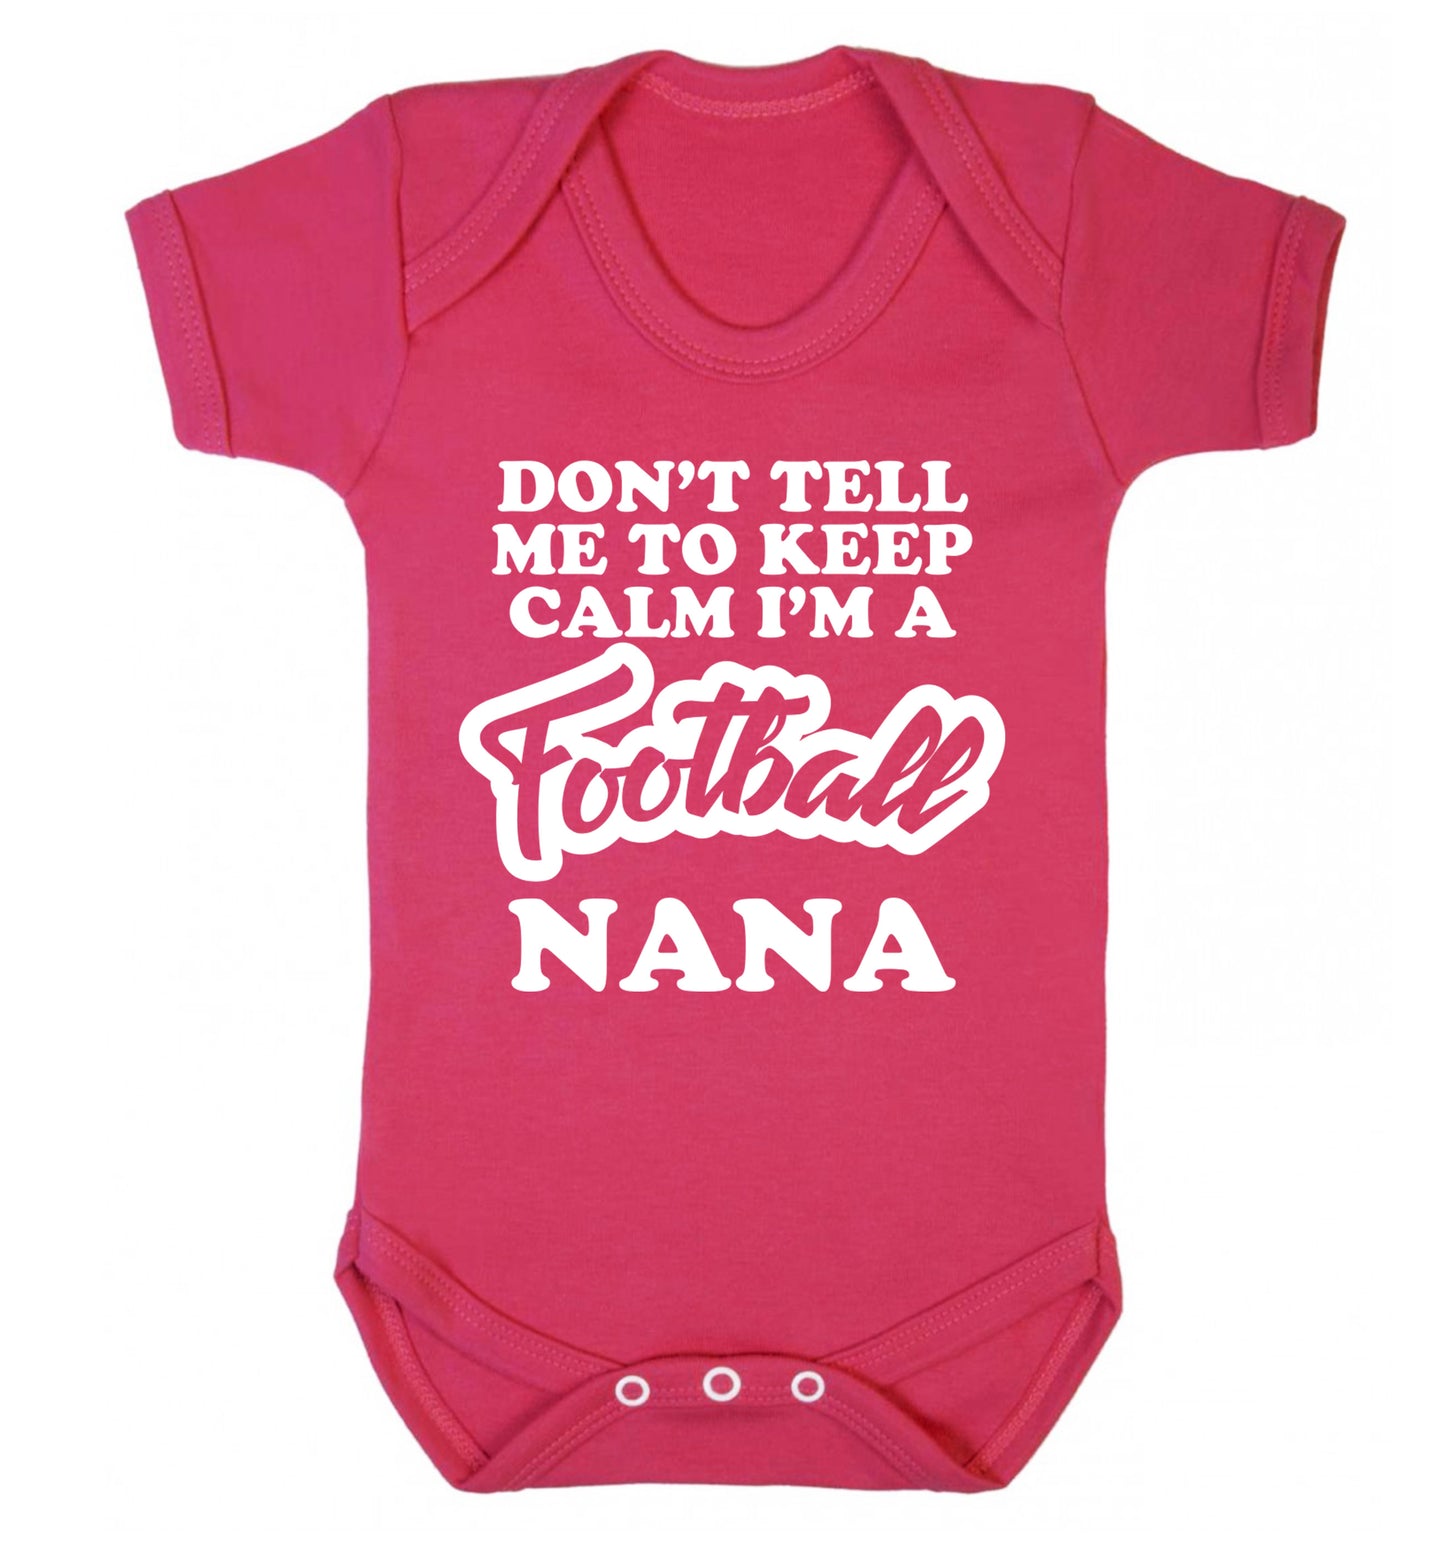 Don't tell me to keep calm I'm a football nana Baby Vest dark pink 18-24 months